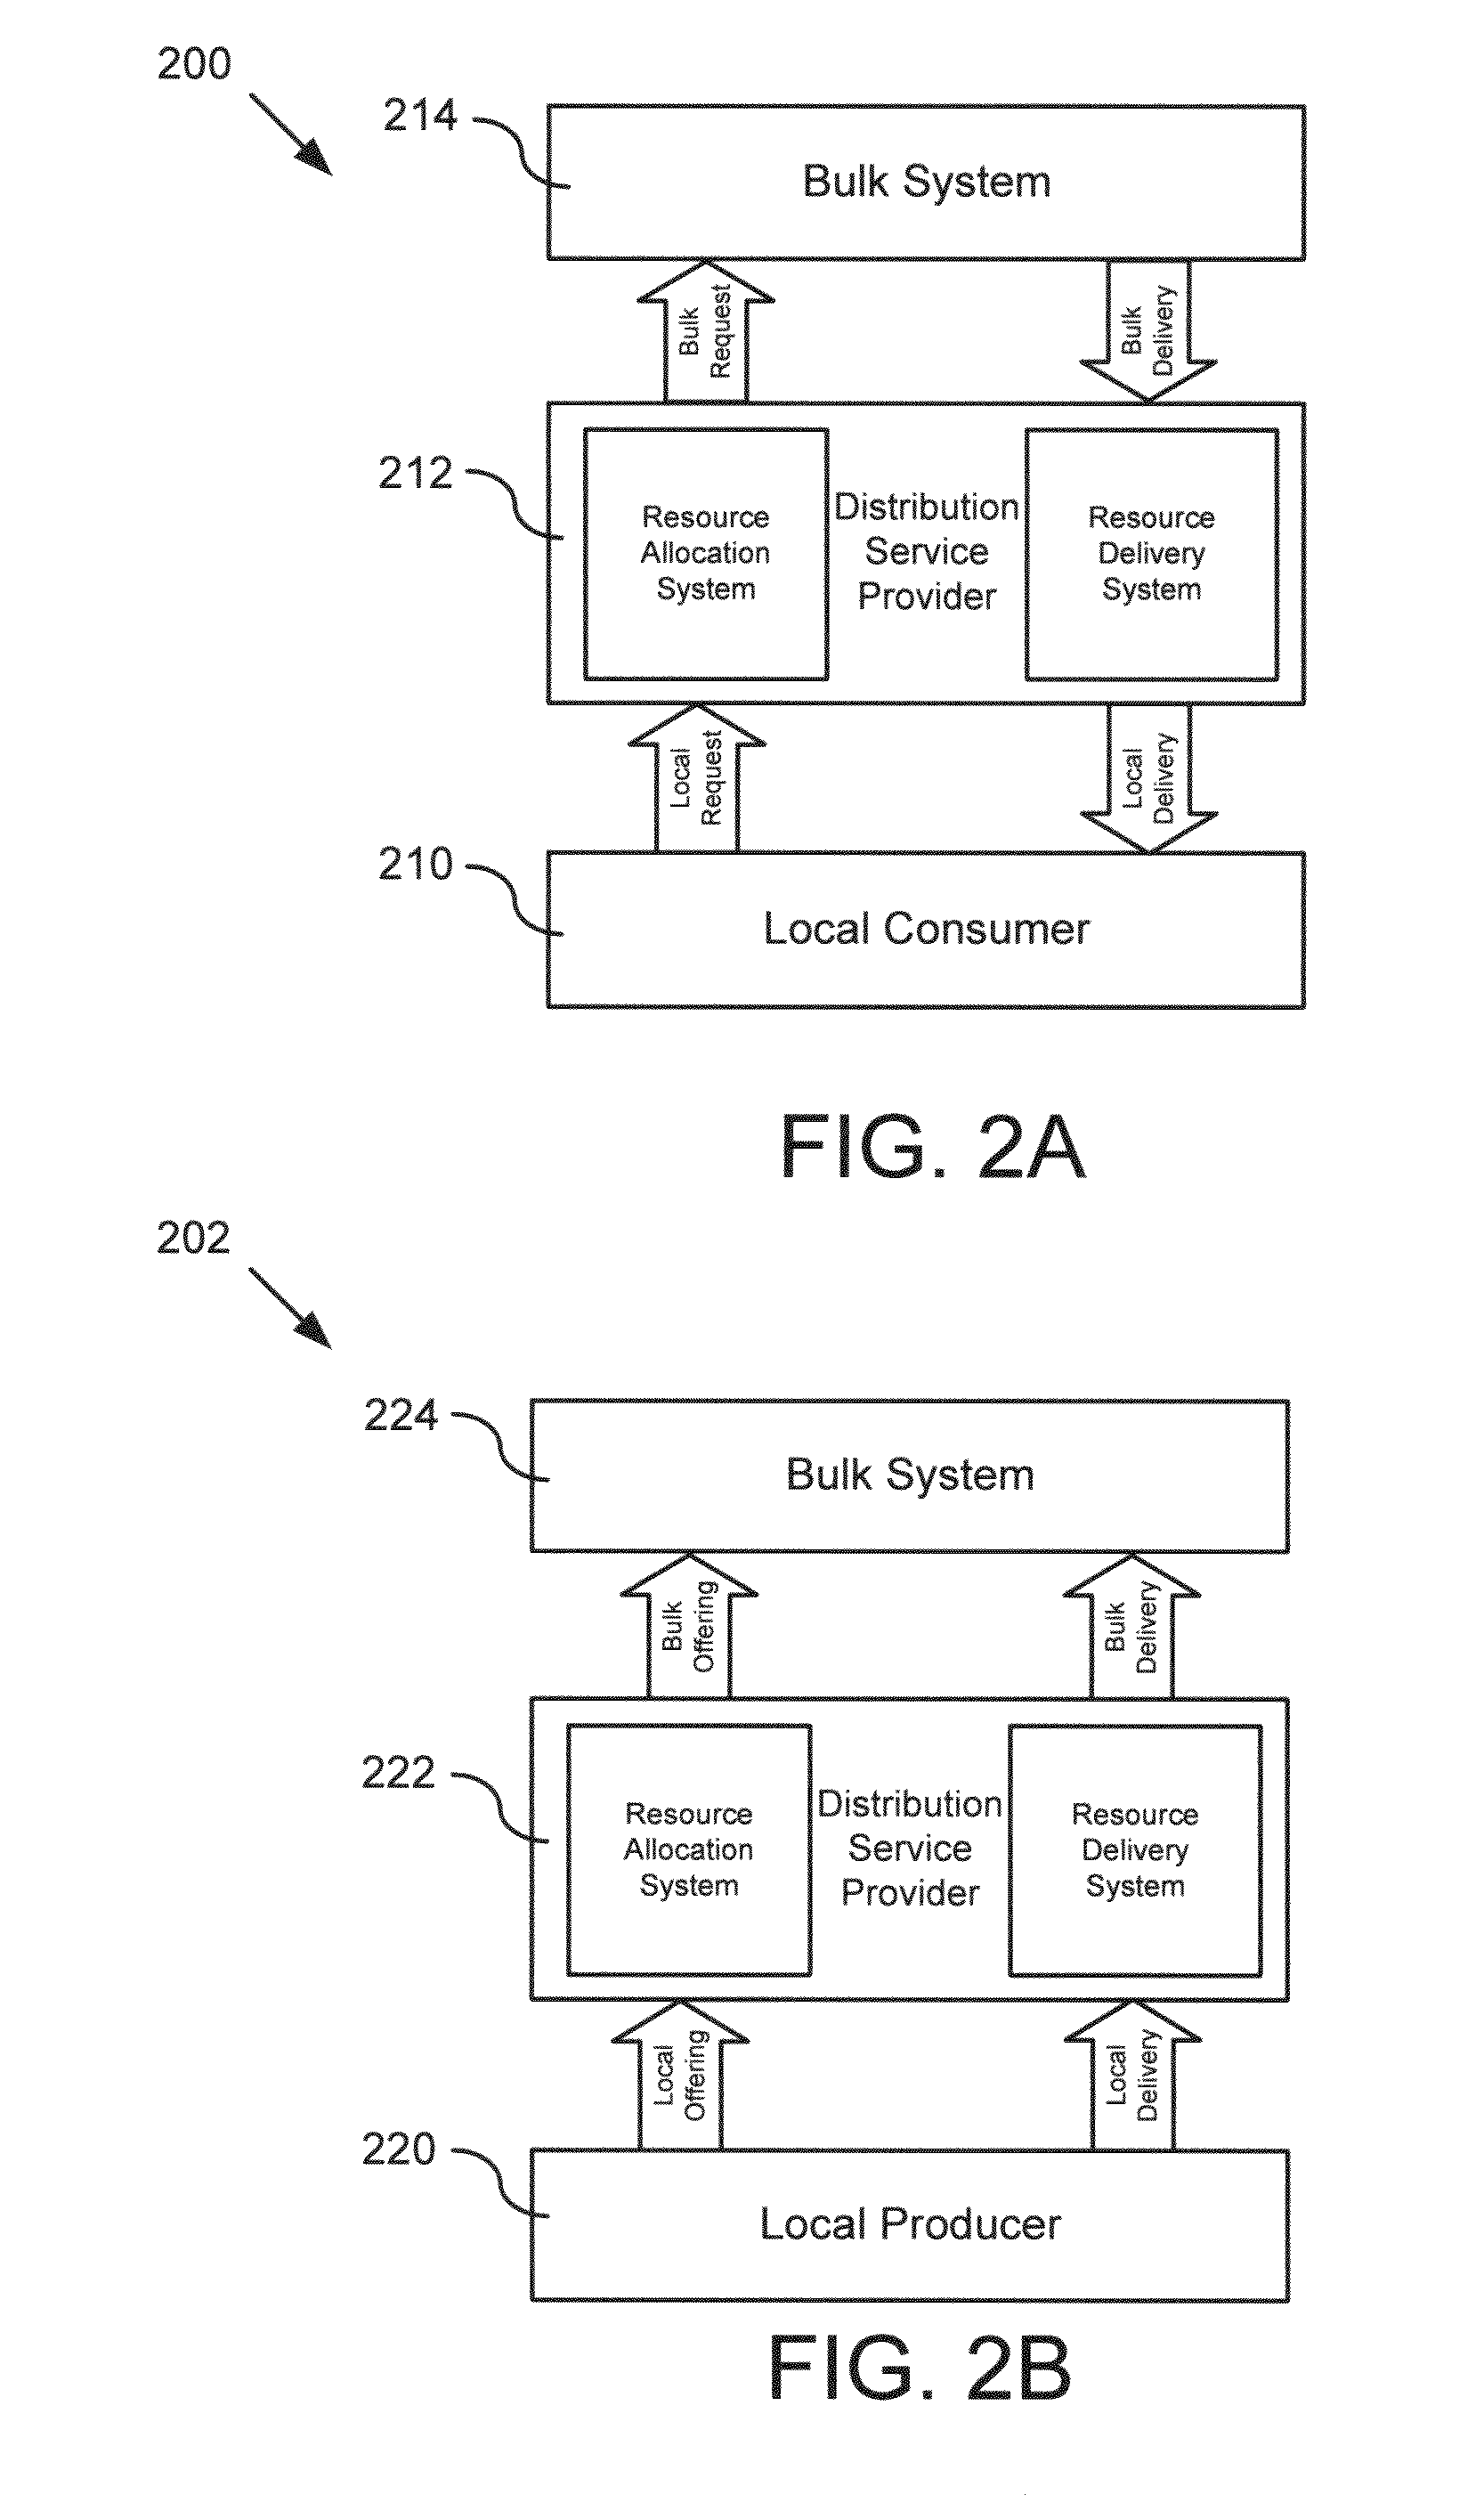 Using one-way communications in a market-based resource allocation system